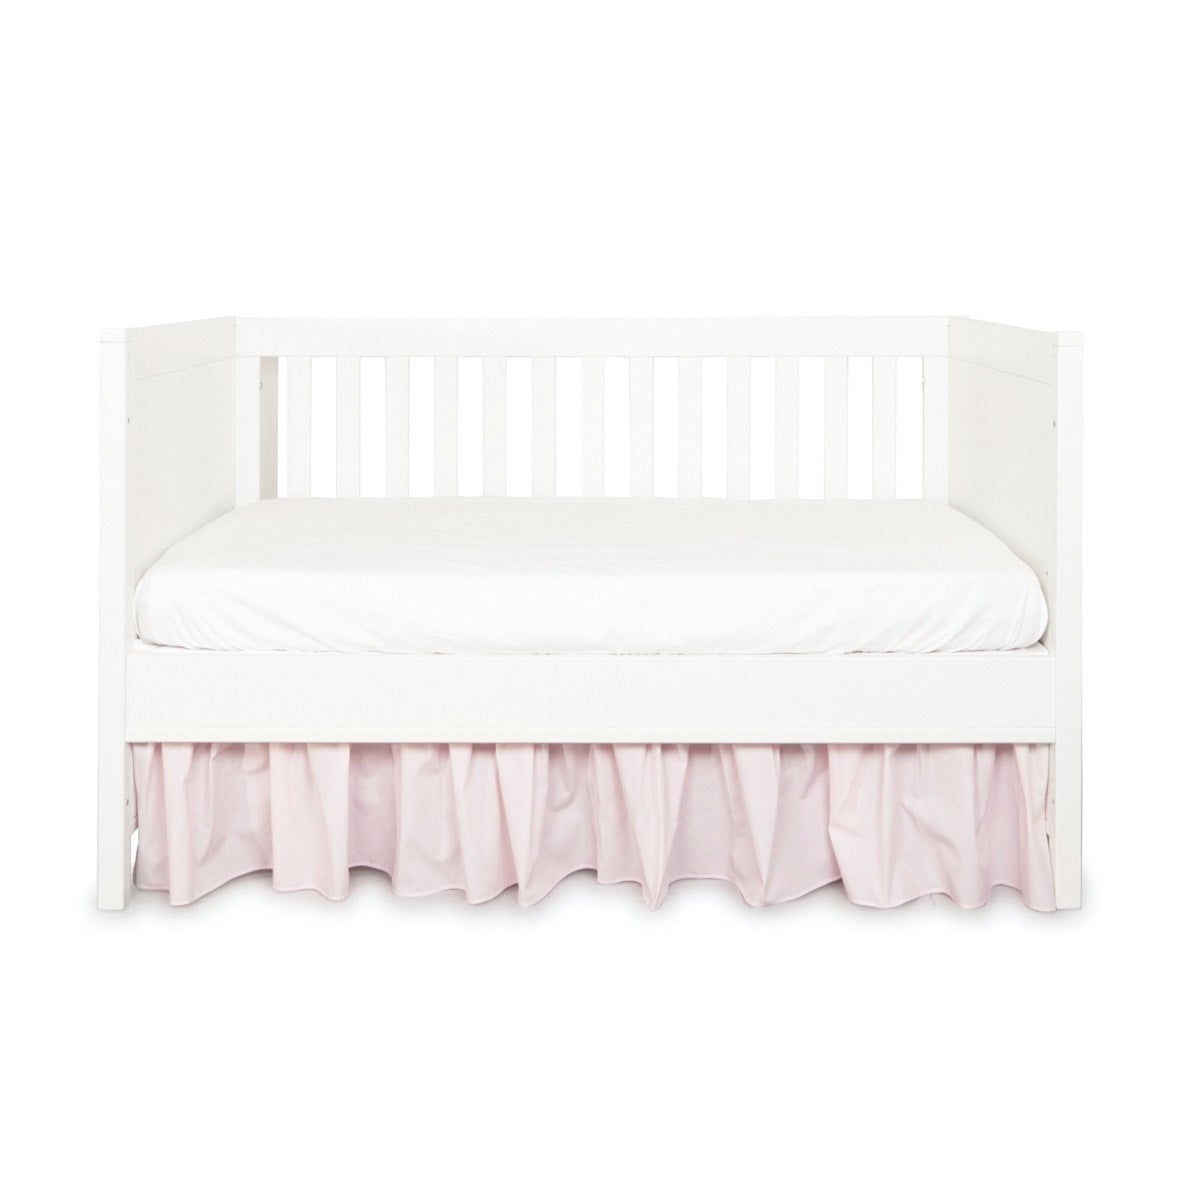 Theophile & Patachou Bed skirt 60 cm - Cotton Pink